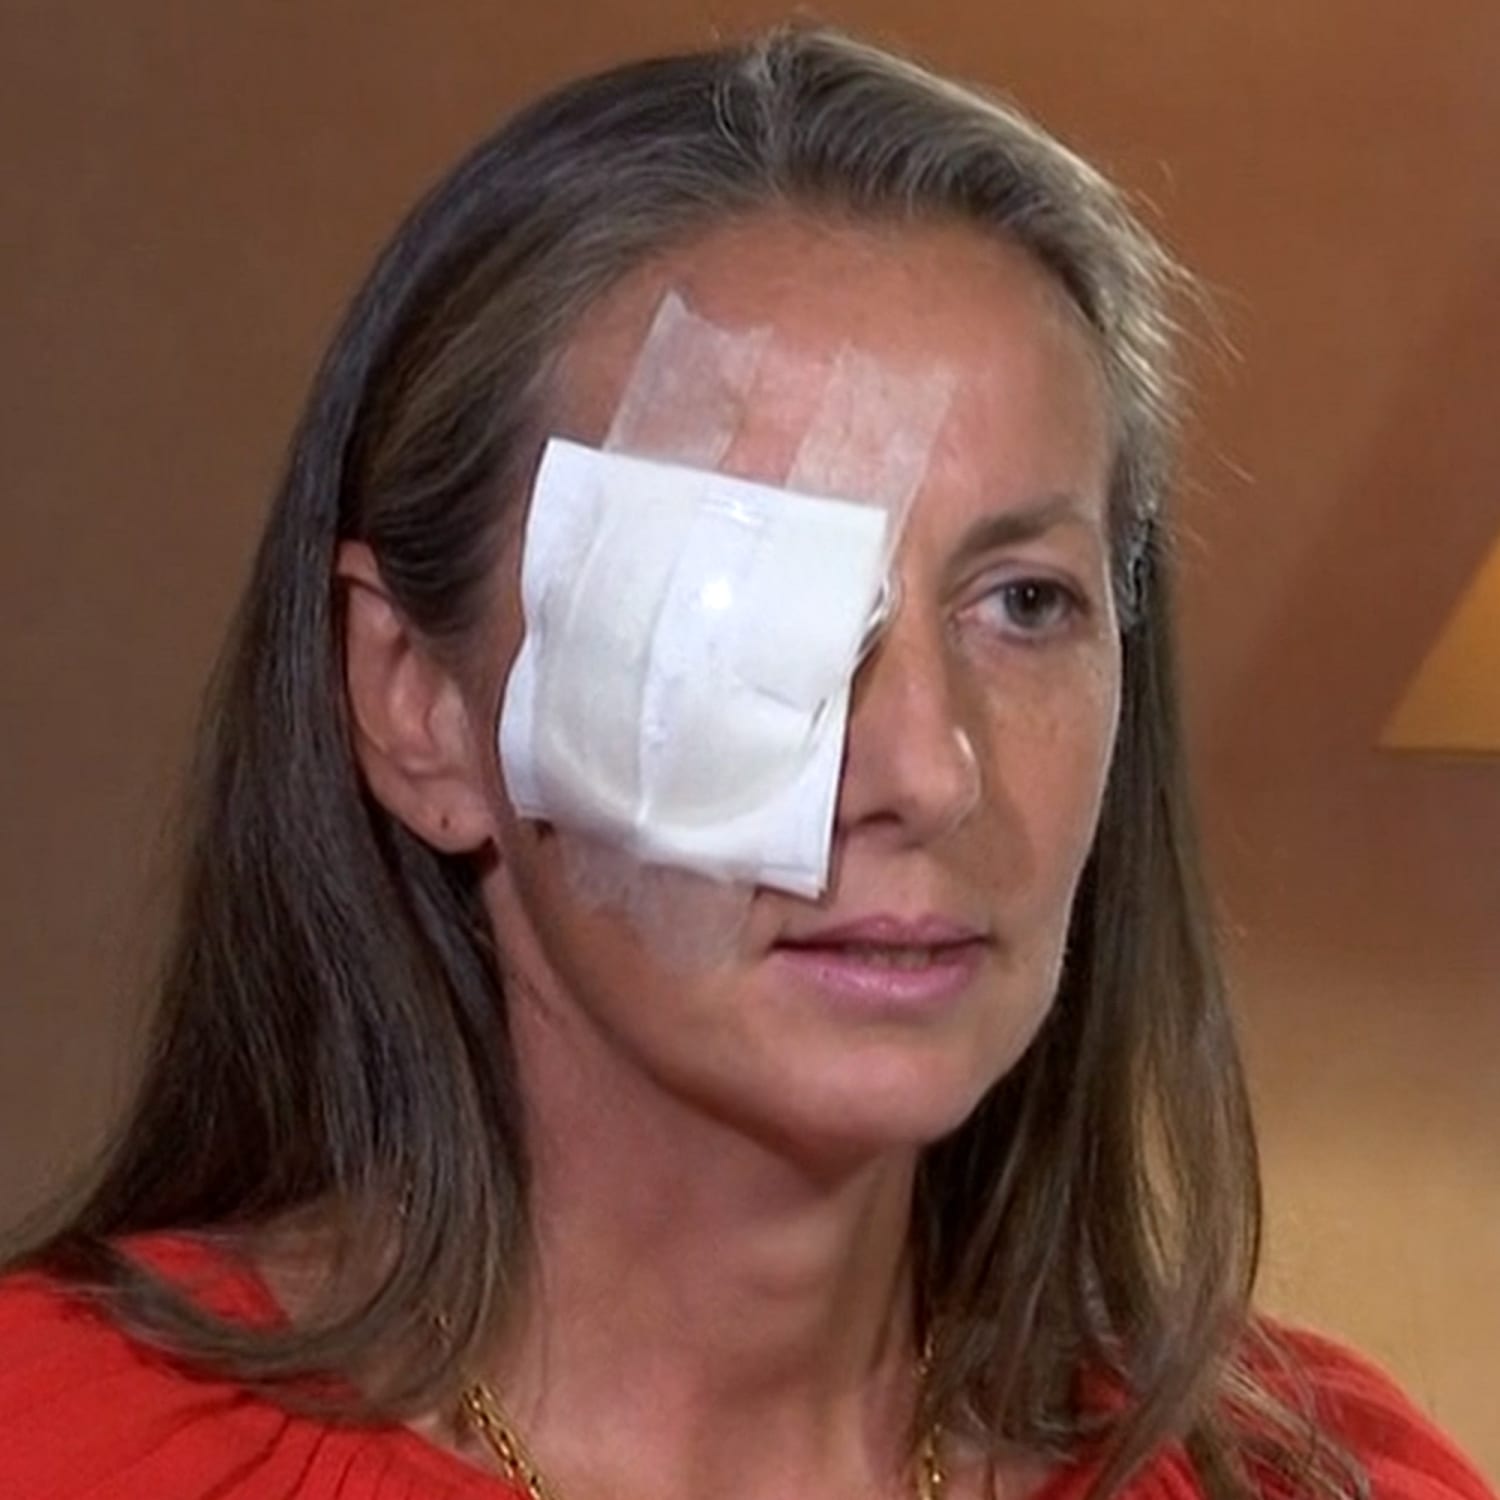 Woman blinded by errant golf shot angry at Ryder Cup officials